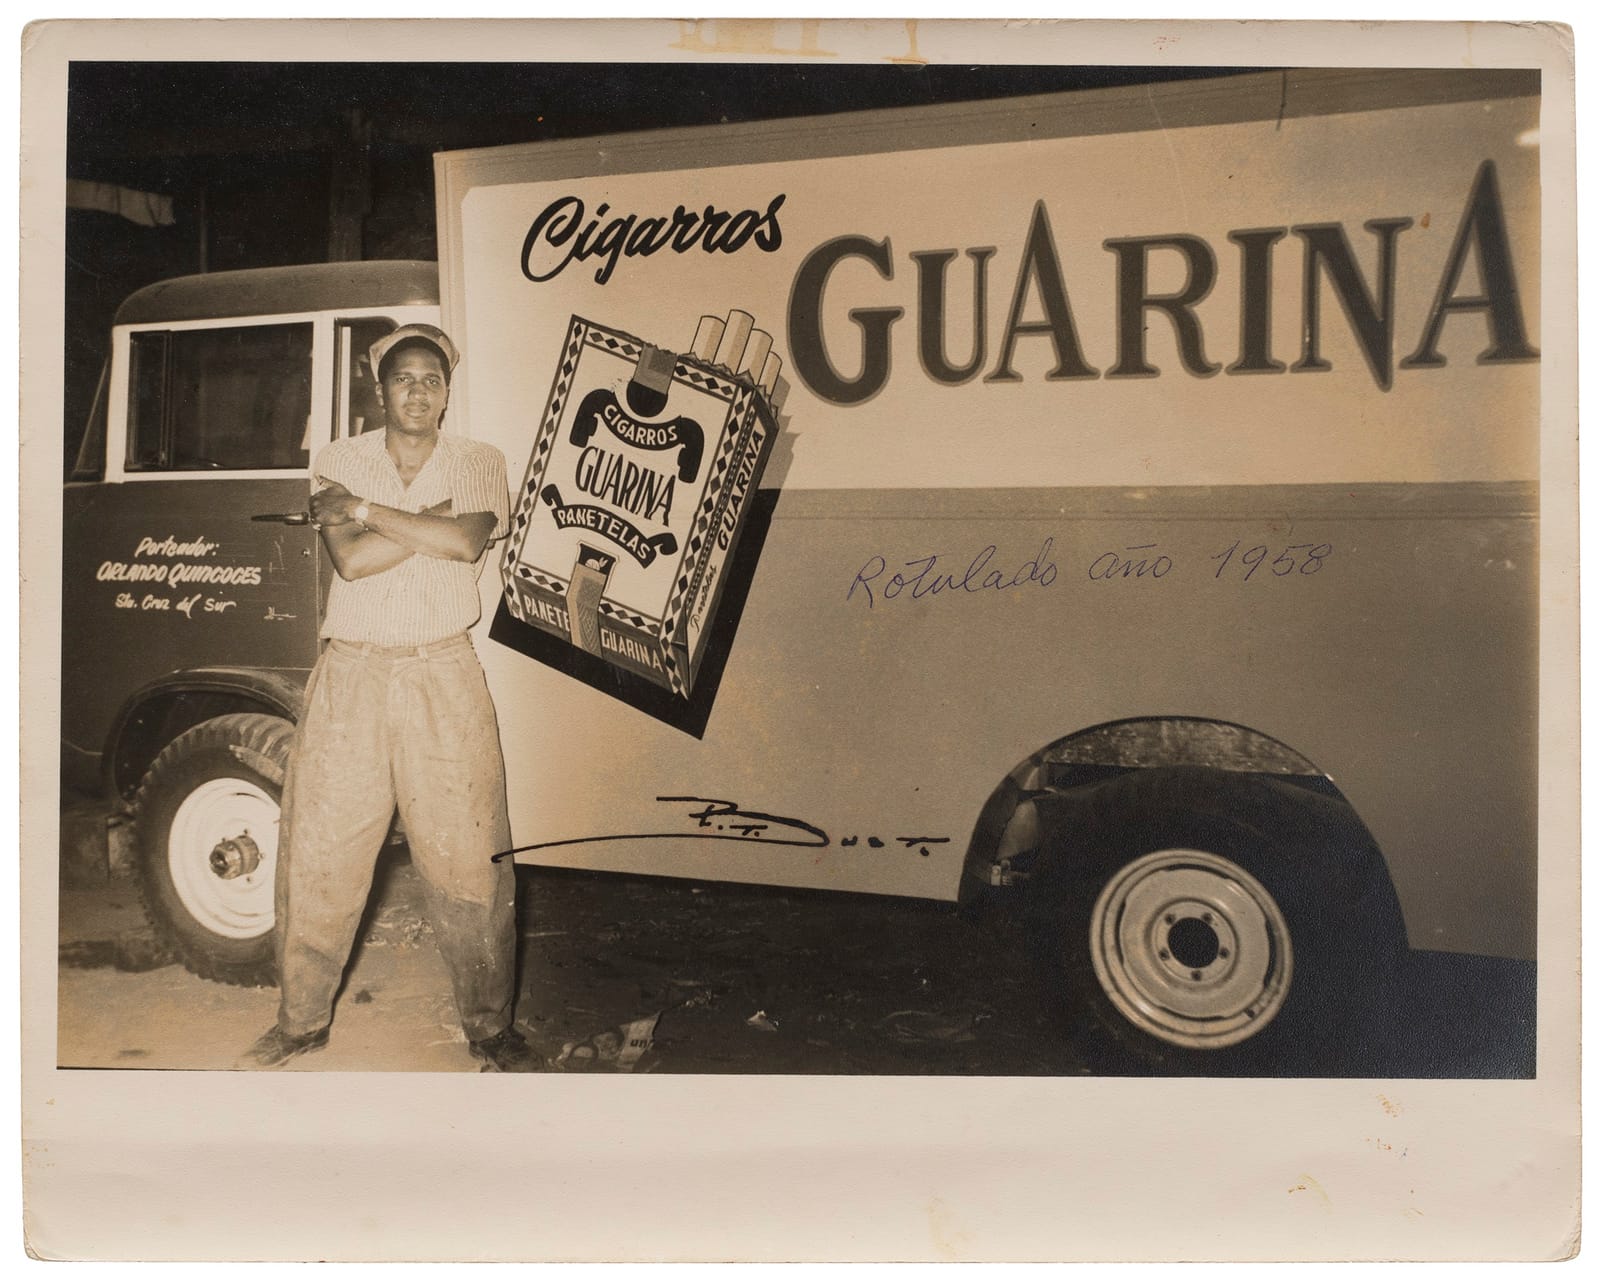 Smartly dressed man with arms folded in front of a lorry that has a picture of a packet of cigars and lettering for the Guarina brand.